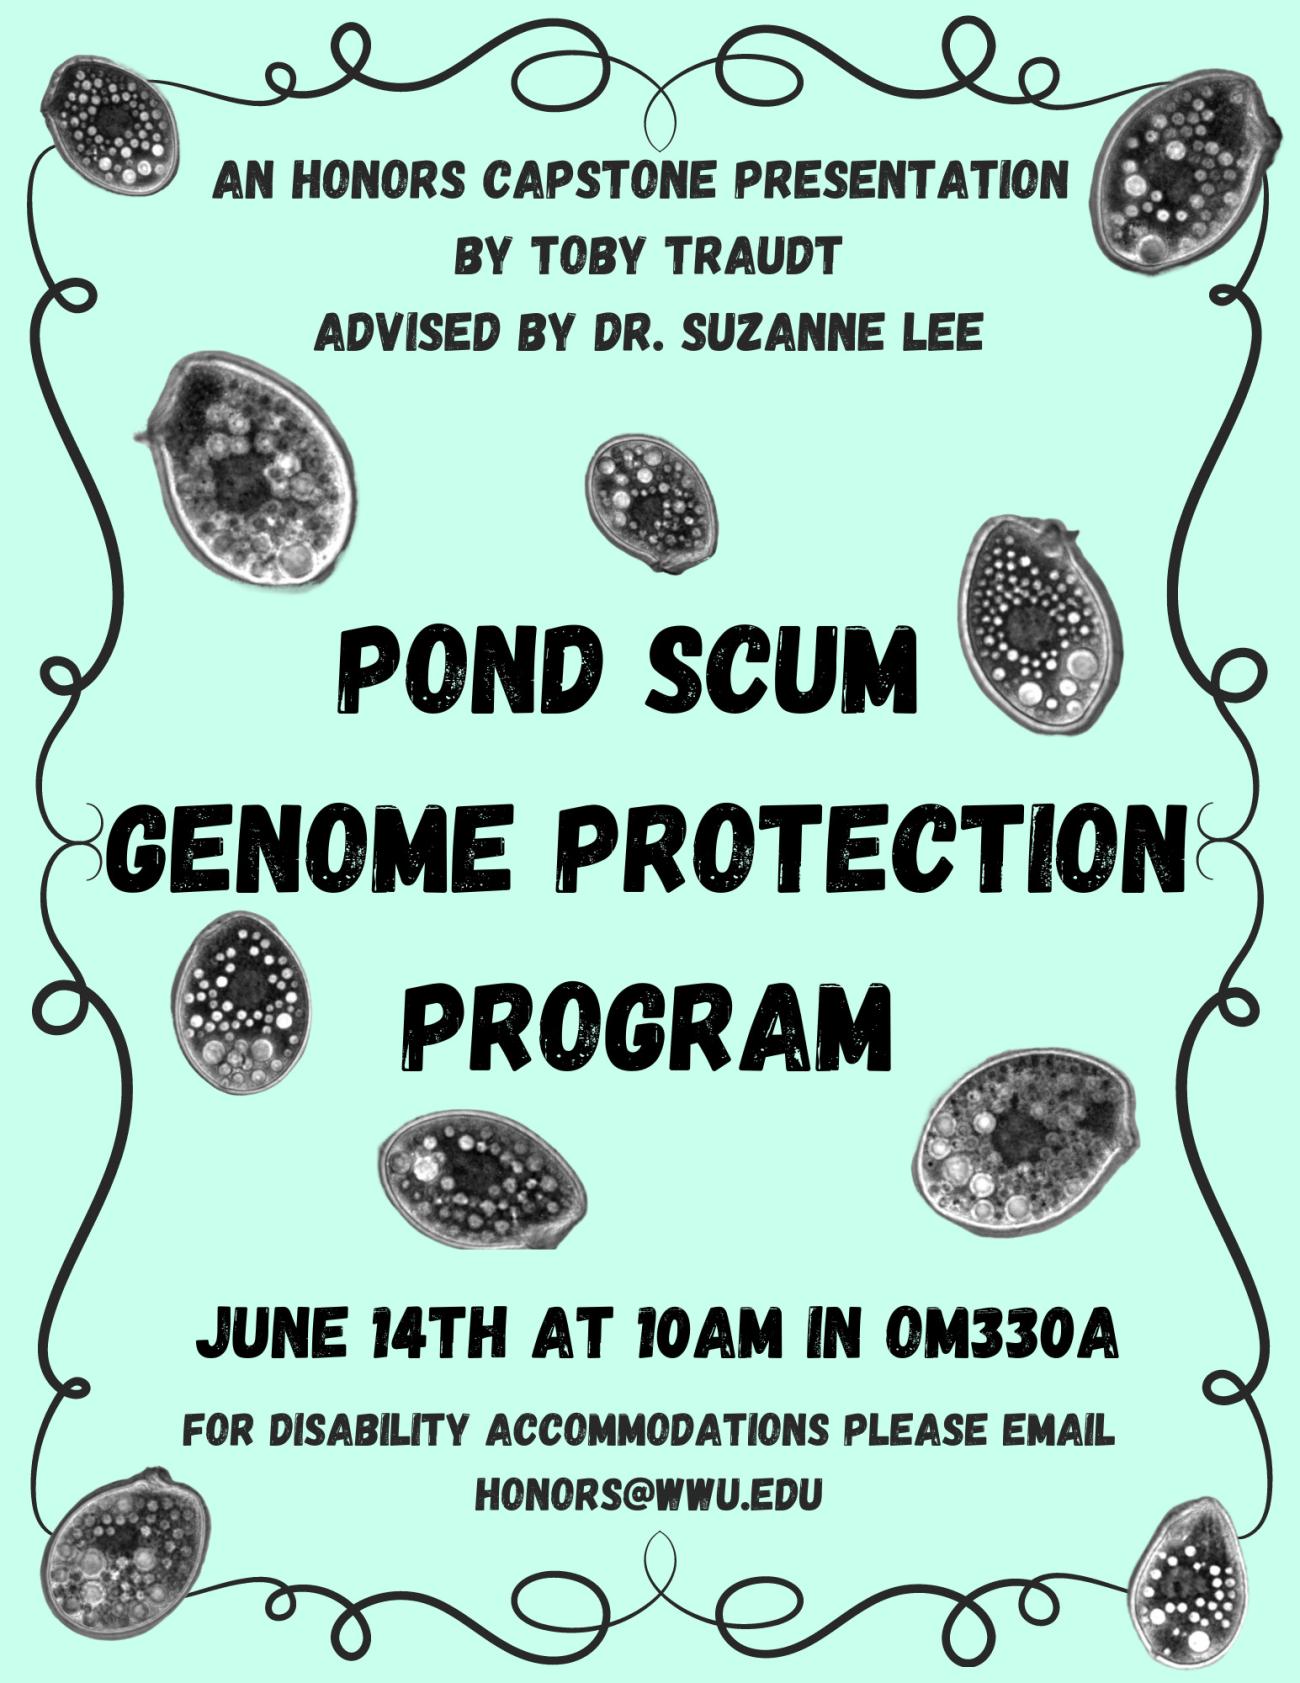 Sea-foam green background with a decorative black border. Scattered across are multiple images of the single-celled eukaryotic ciliate Tetrahymena thermophila. Text reads “An Honors Capstone Presentation by Toby Traudt. Advised by Dr. Suzanne Lee. Pond Scum Genome Protection Program. June 14th At 10AM in OM330A. For Disability Accommodations Please Email honors@wwu.edu”